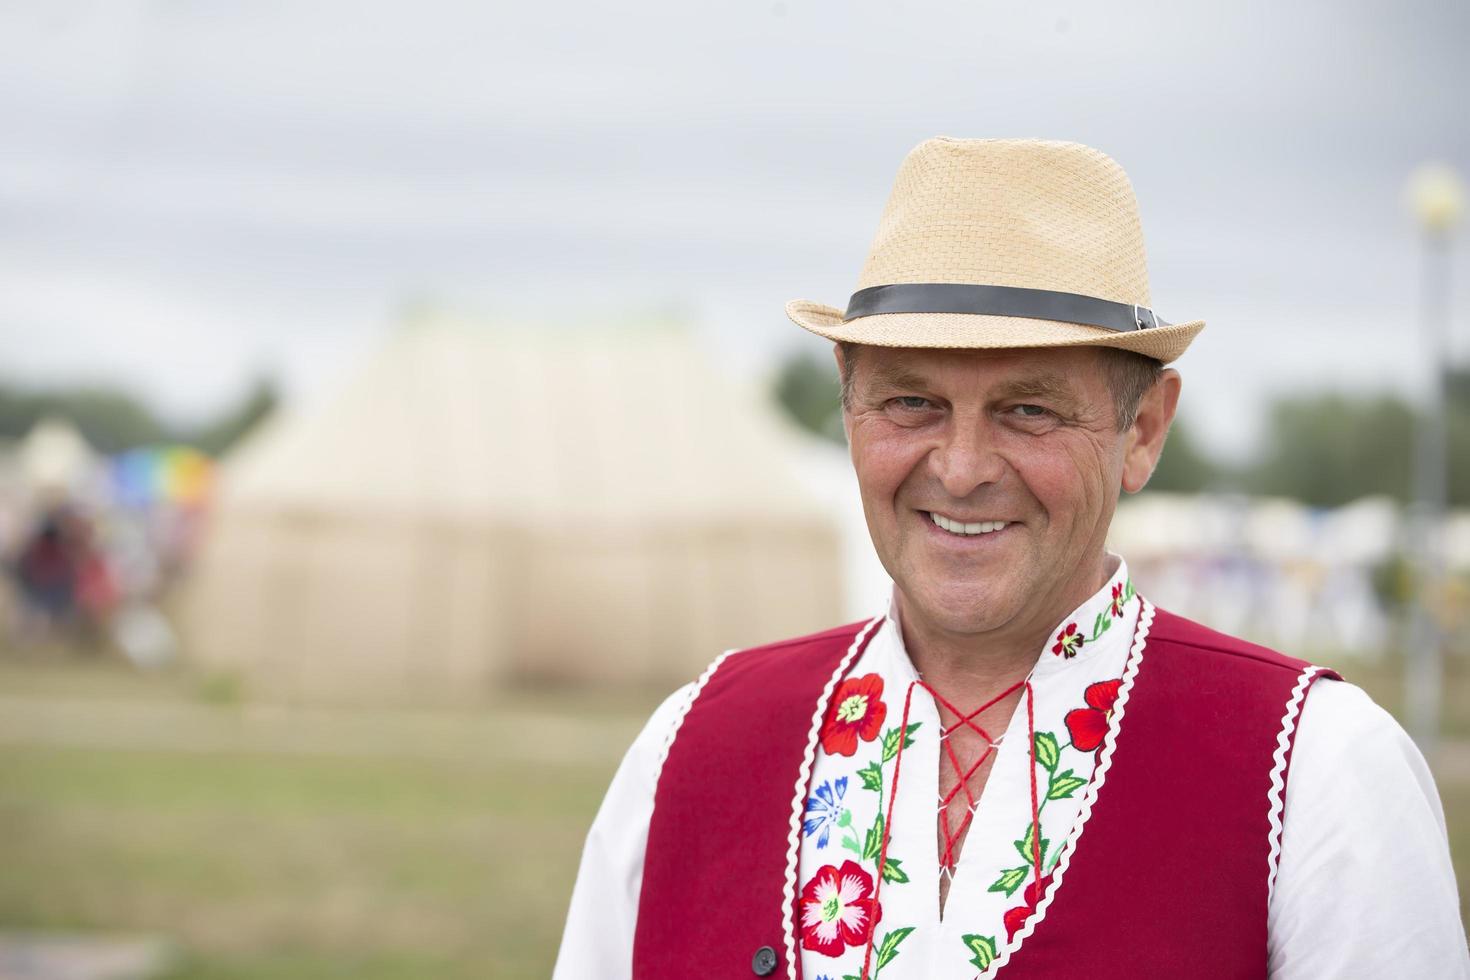 Belarus, the village of Lyaskovichi. August 20, 2022. Festival of ethnic cultures. Slavic man in an ethnic Belarusian costume and a straw hat. photo